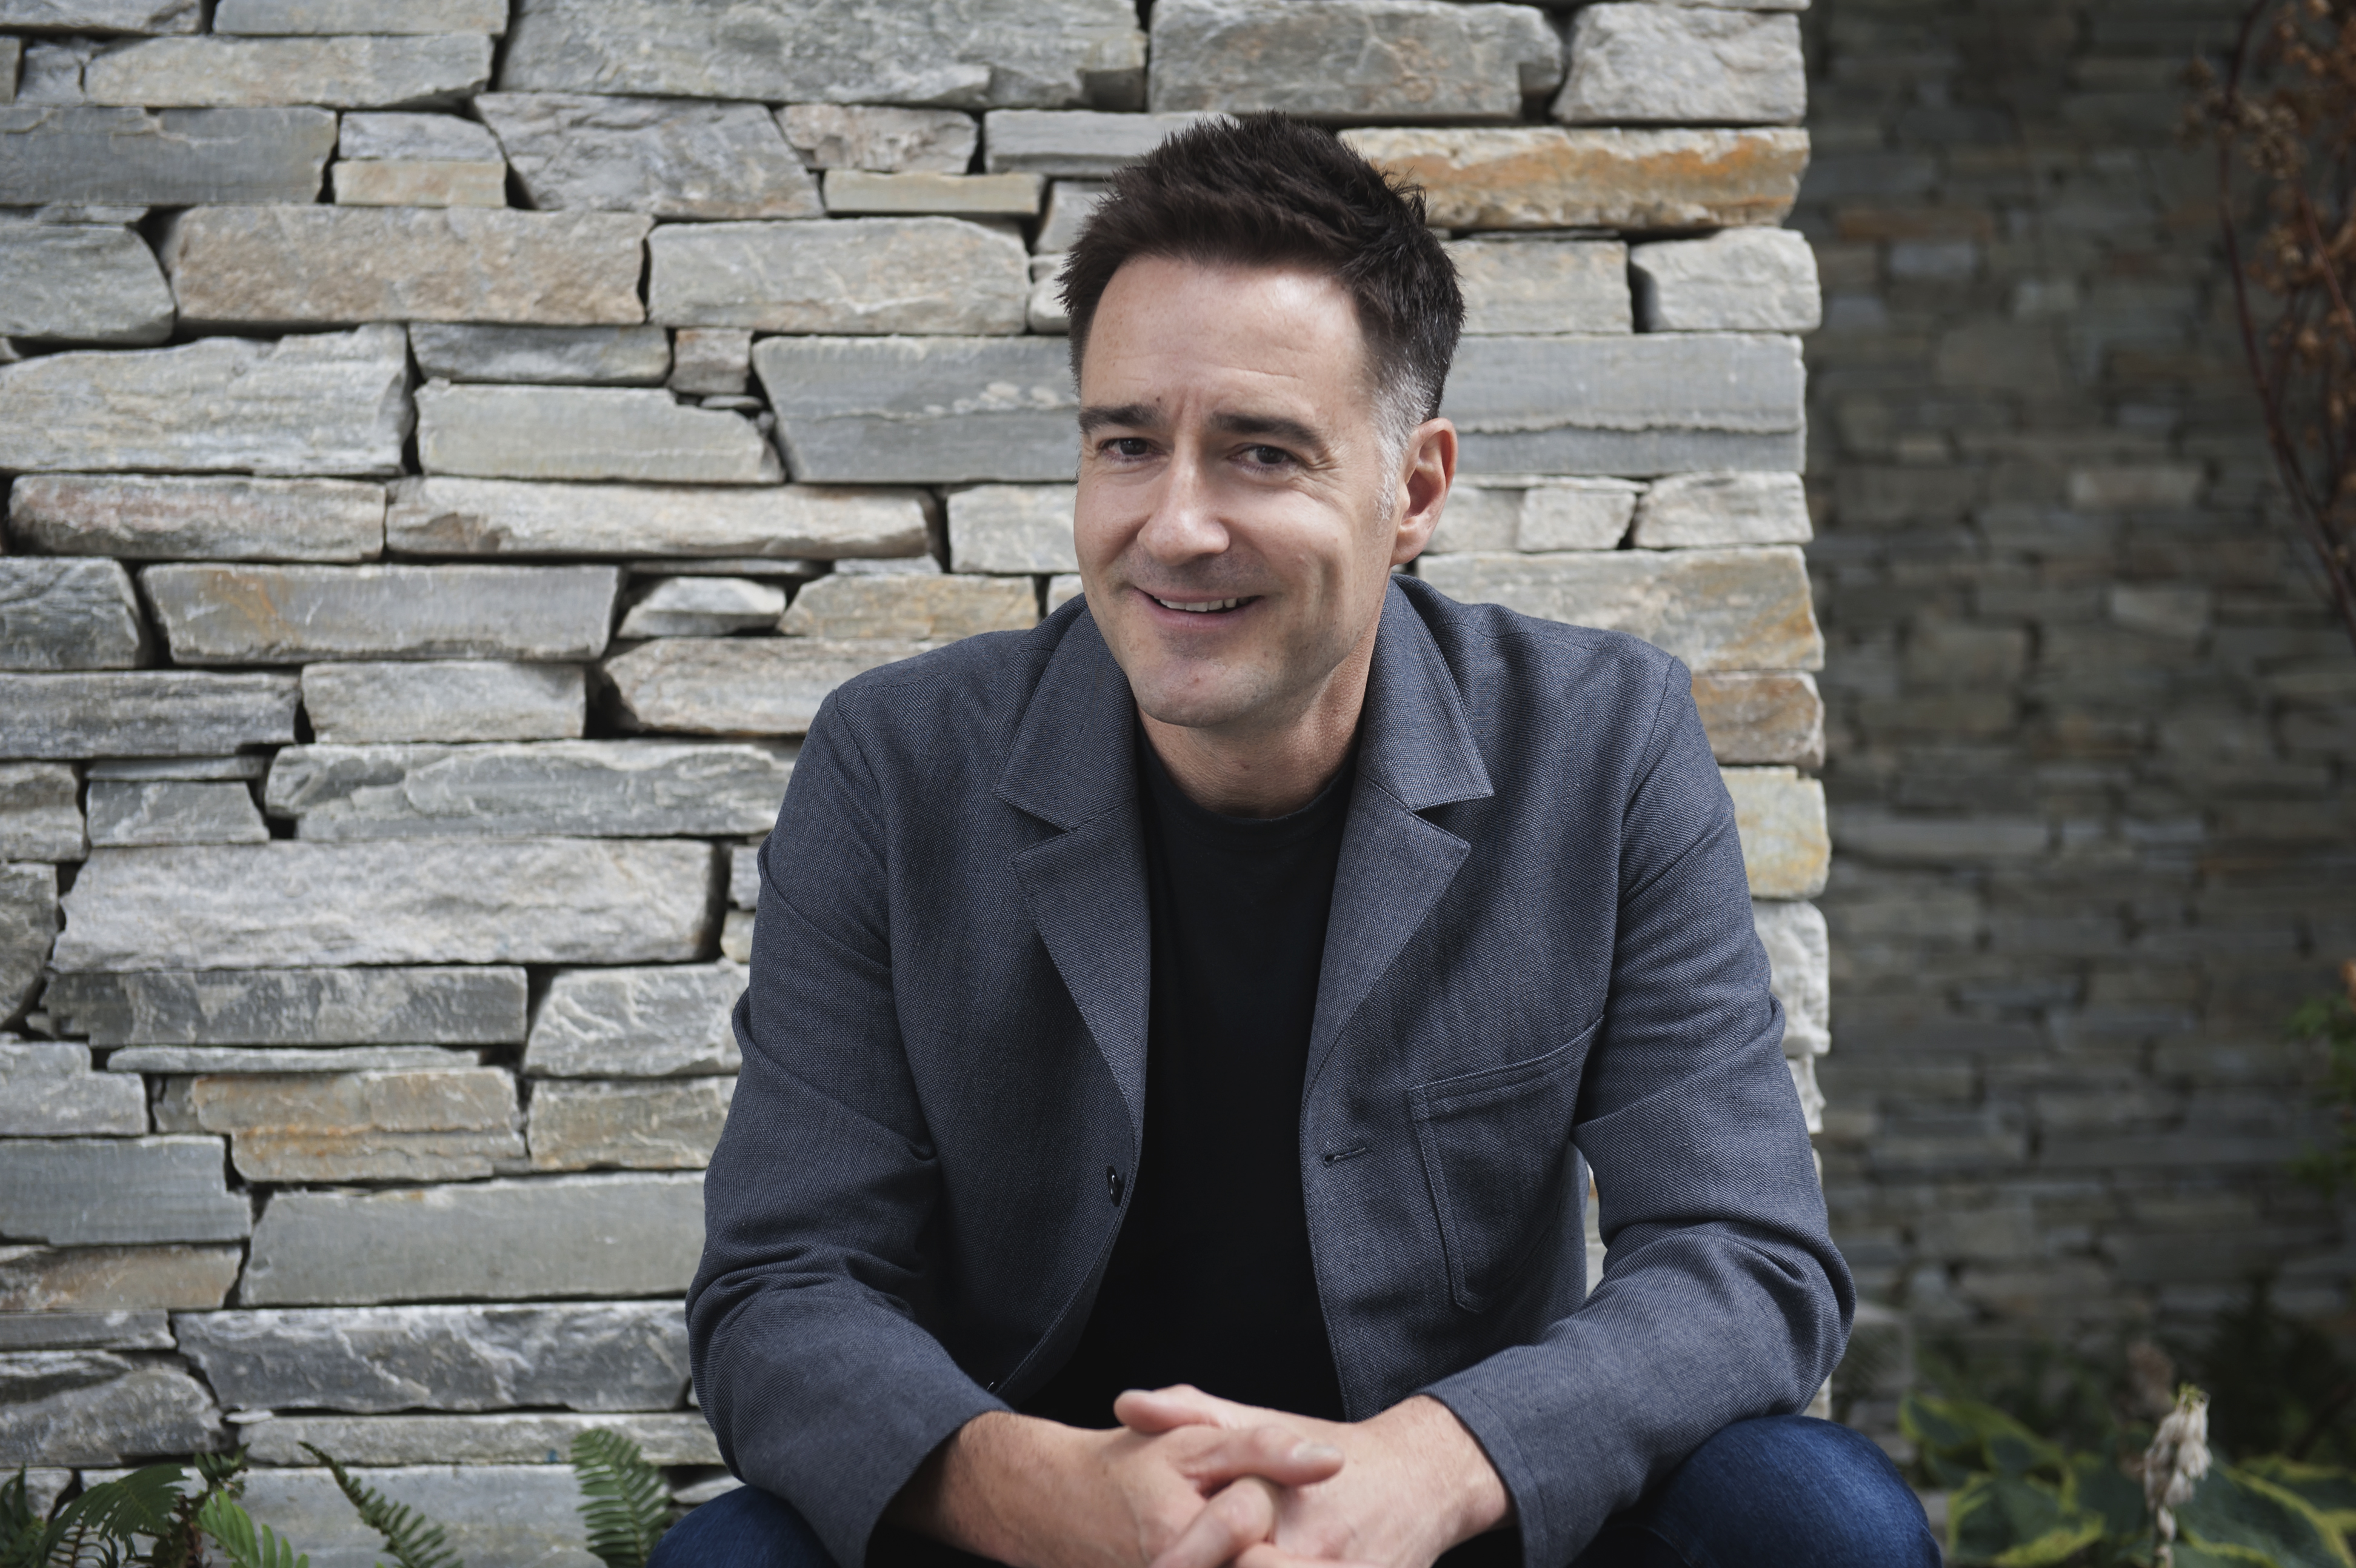 Interview with Brian Scudamore, Entrepreneur and Franchising Genius